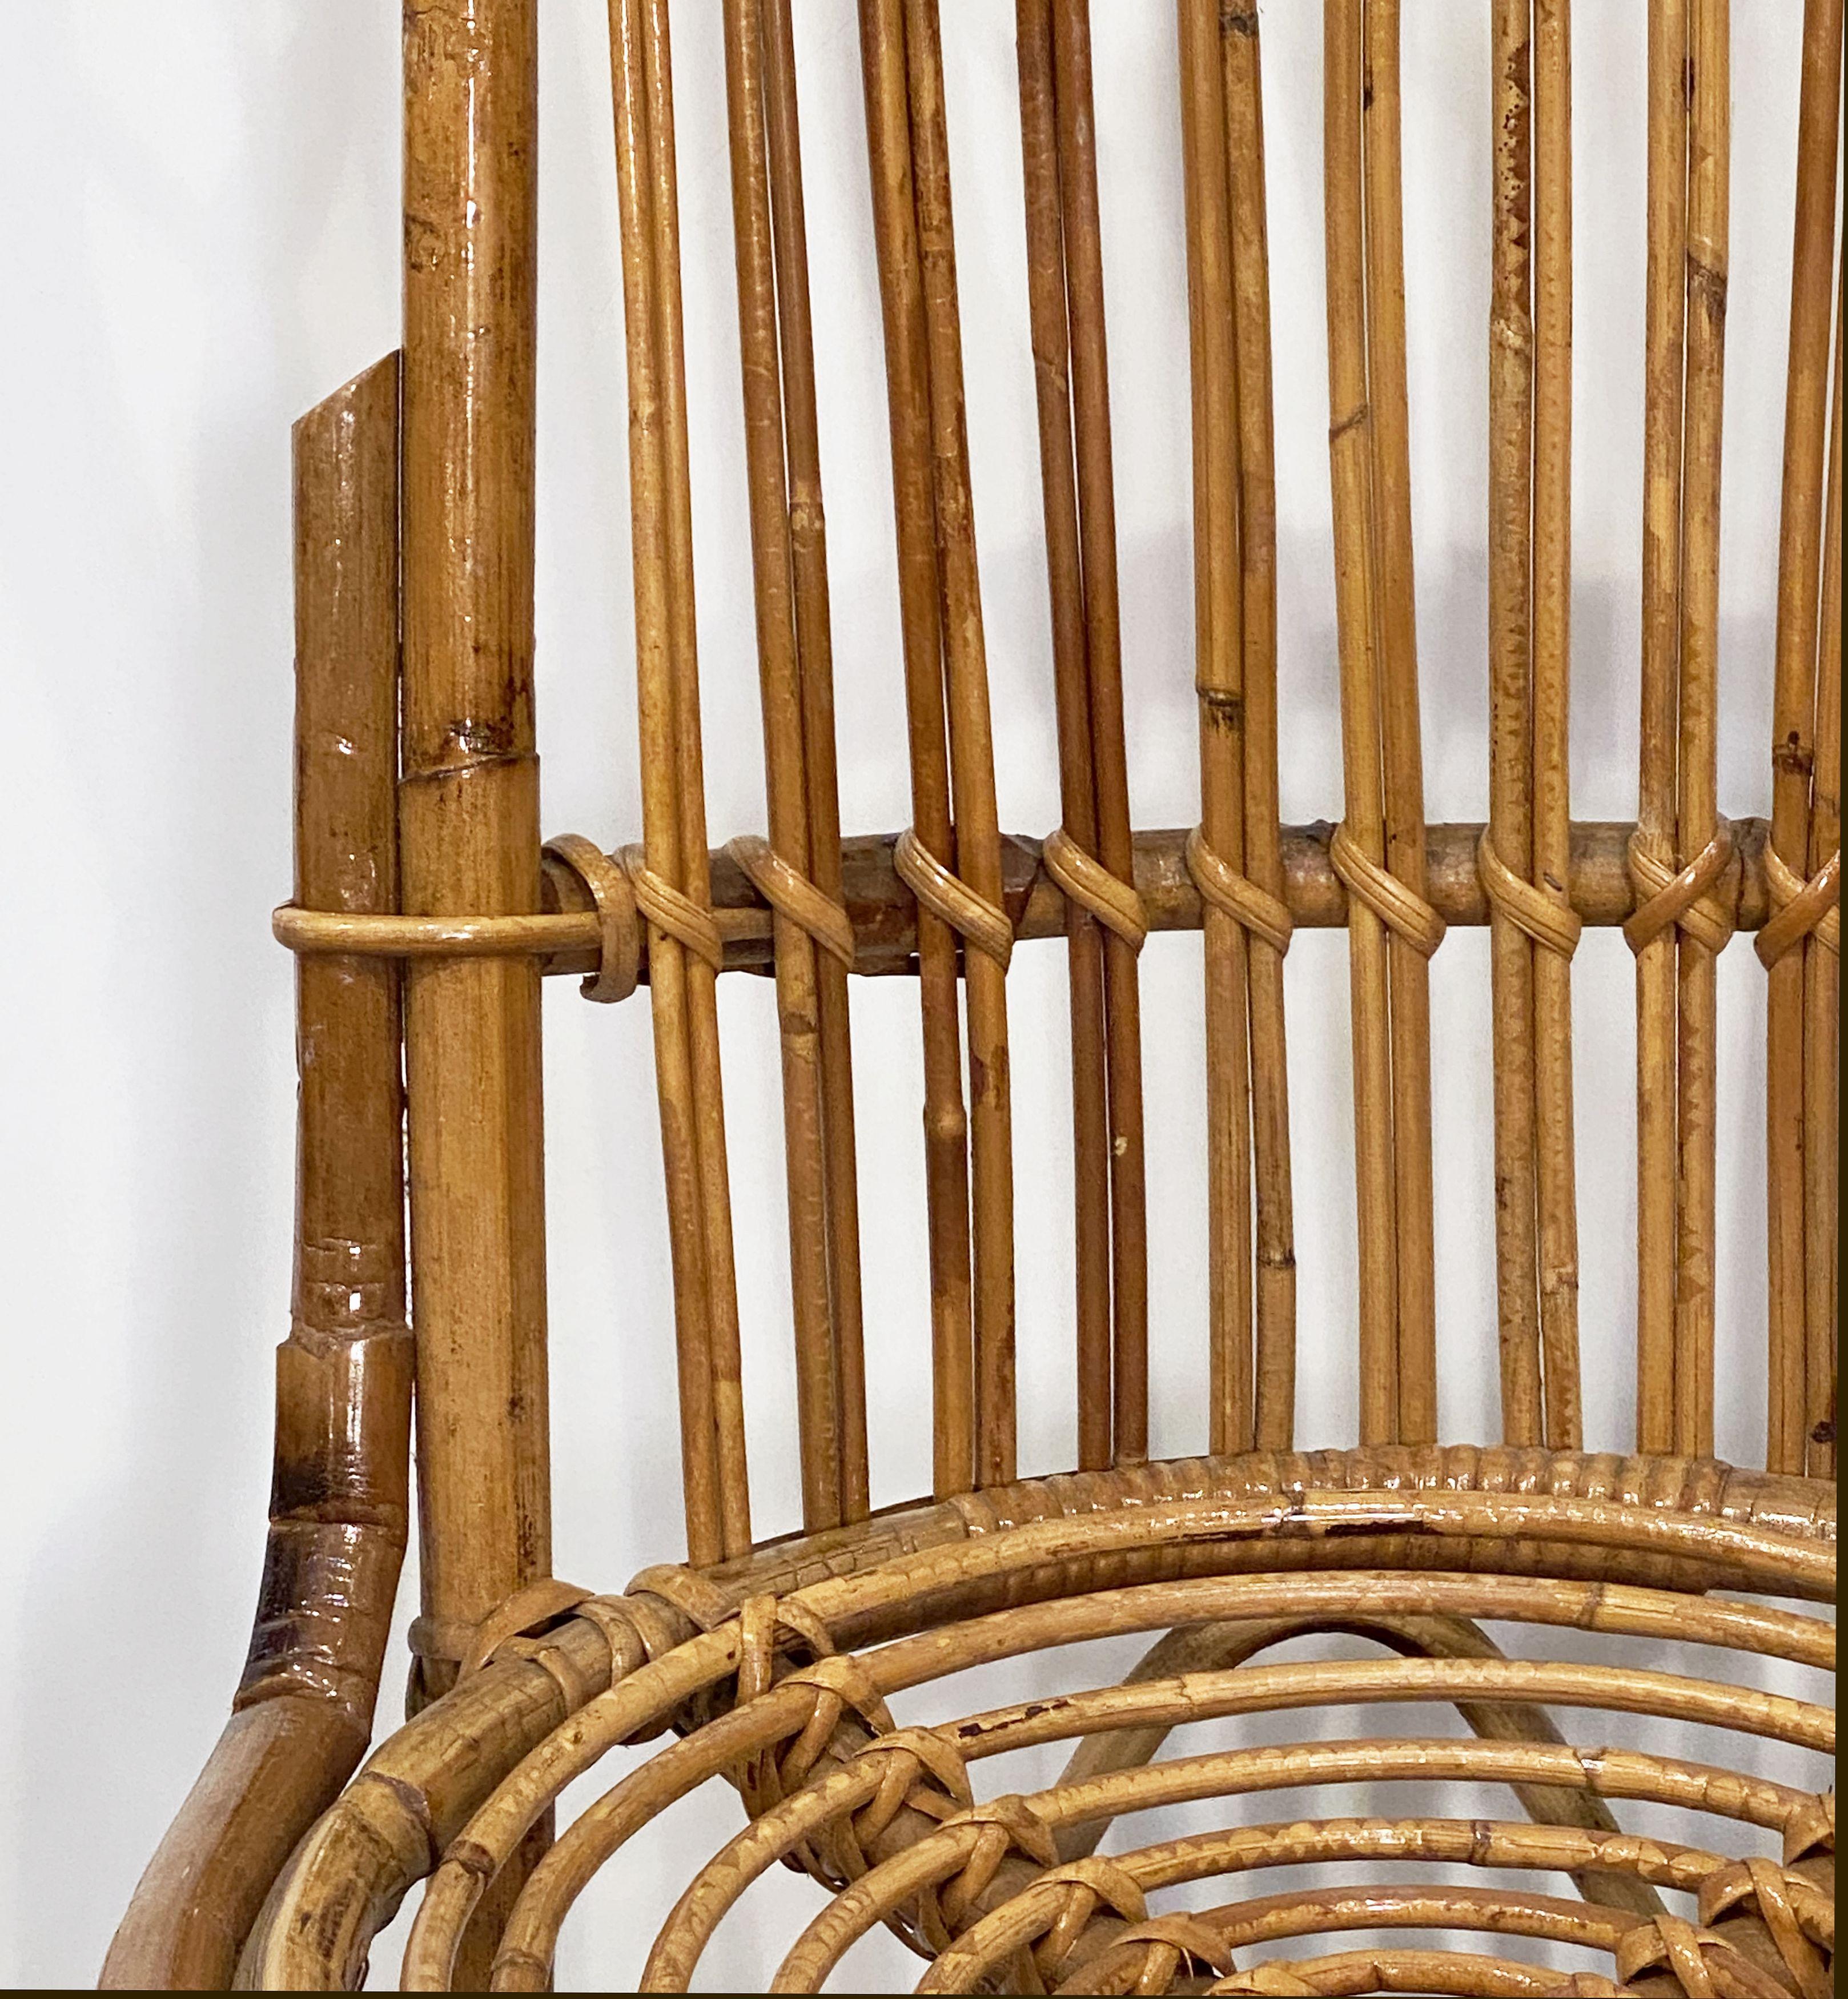 Italian Fan-Backed Chair of Rattan and Bamboo from the Mid-20th Century For Sale 4